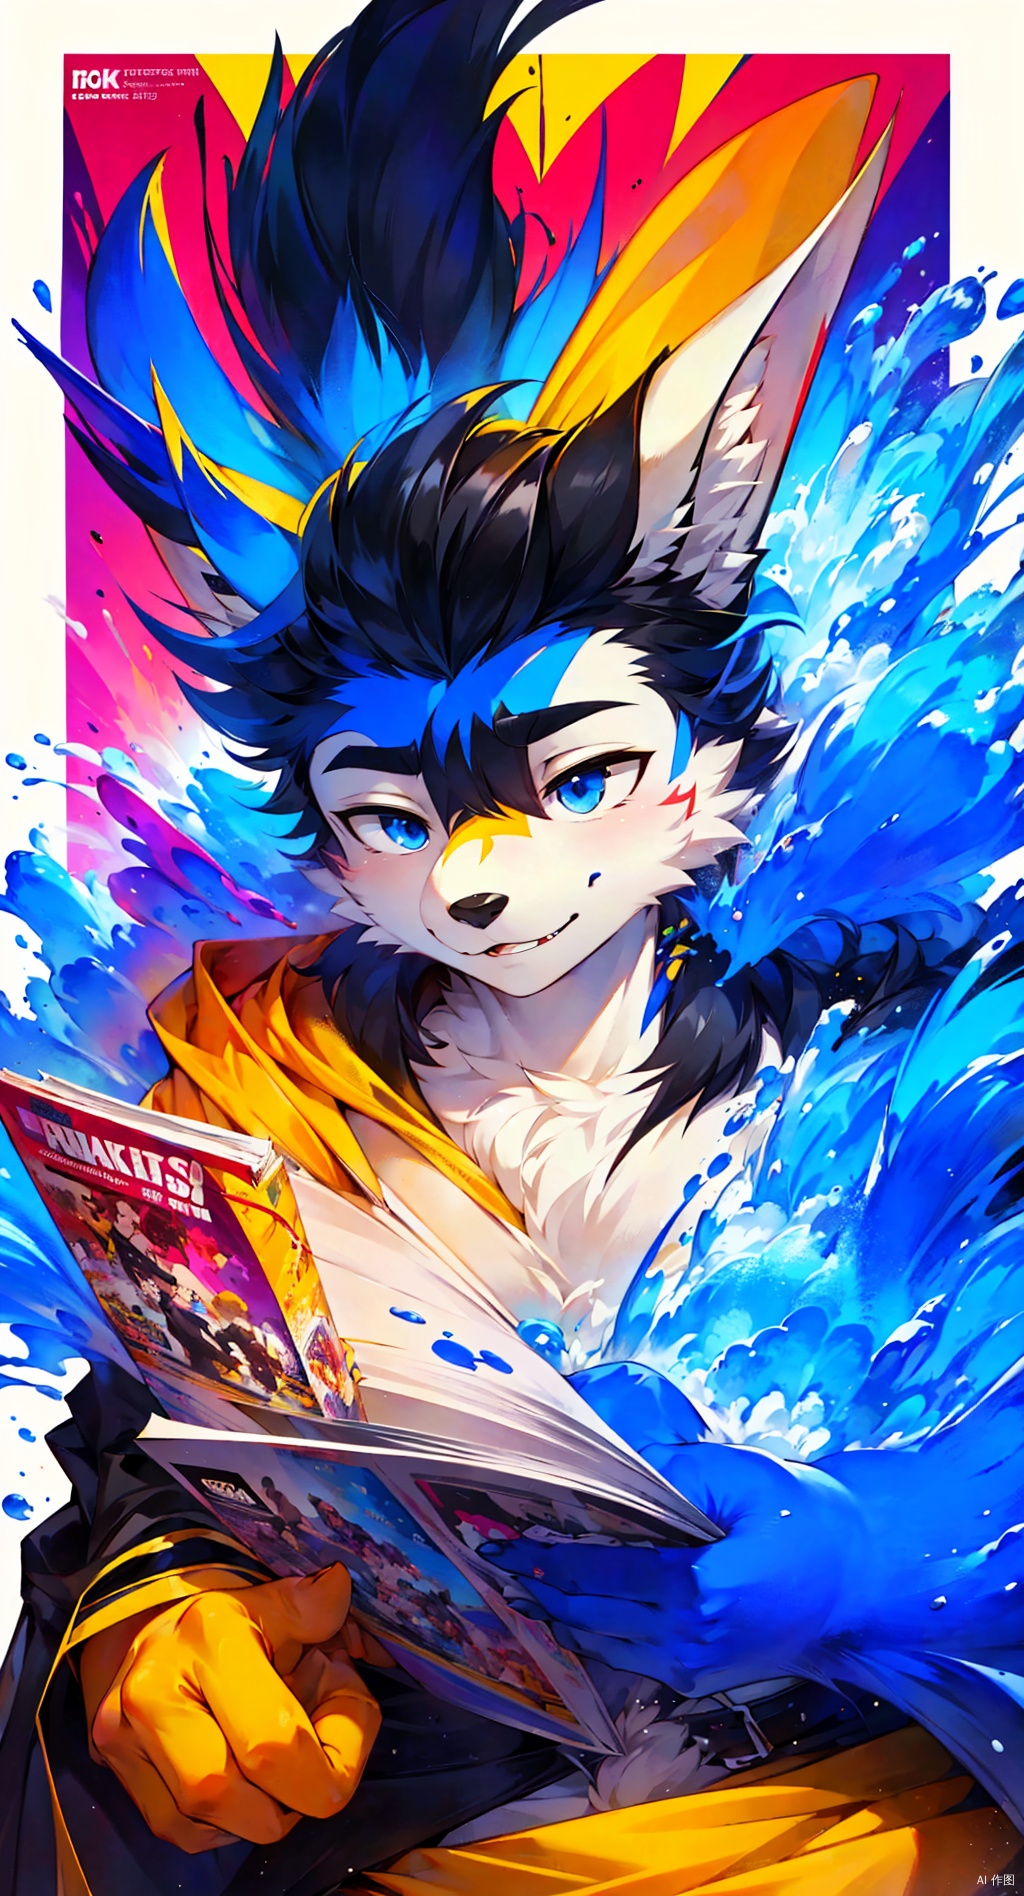  (full :1.1),masterpiece,bestquality,8k,officialart,cinematic light,ultrahighres,movie perspective, advertising style, magazine cover
offcial art, colorful, Colorful background, splash of color, Hyung Tae Kim, furry